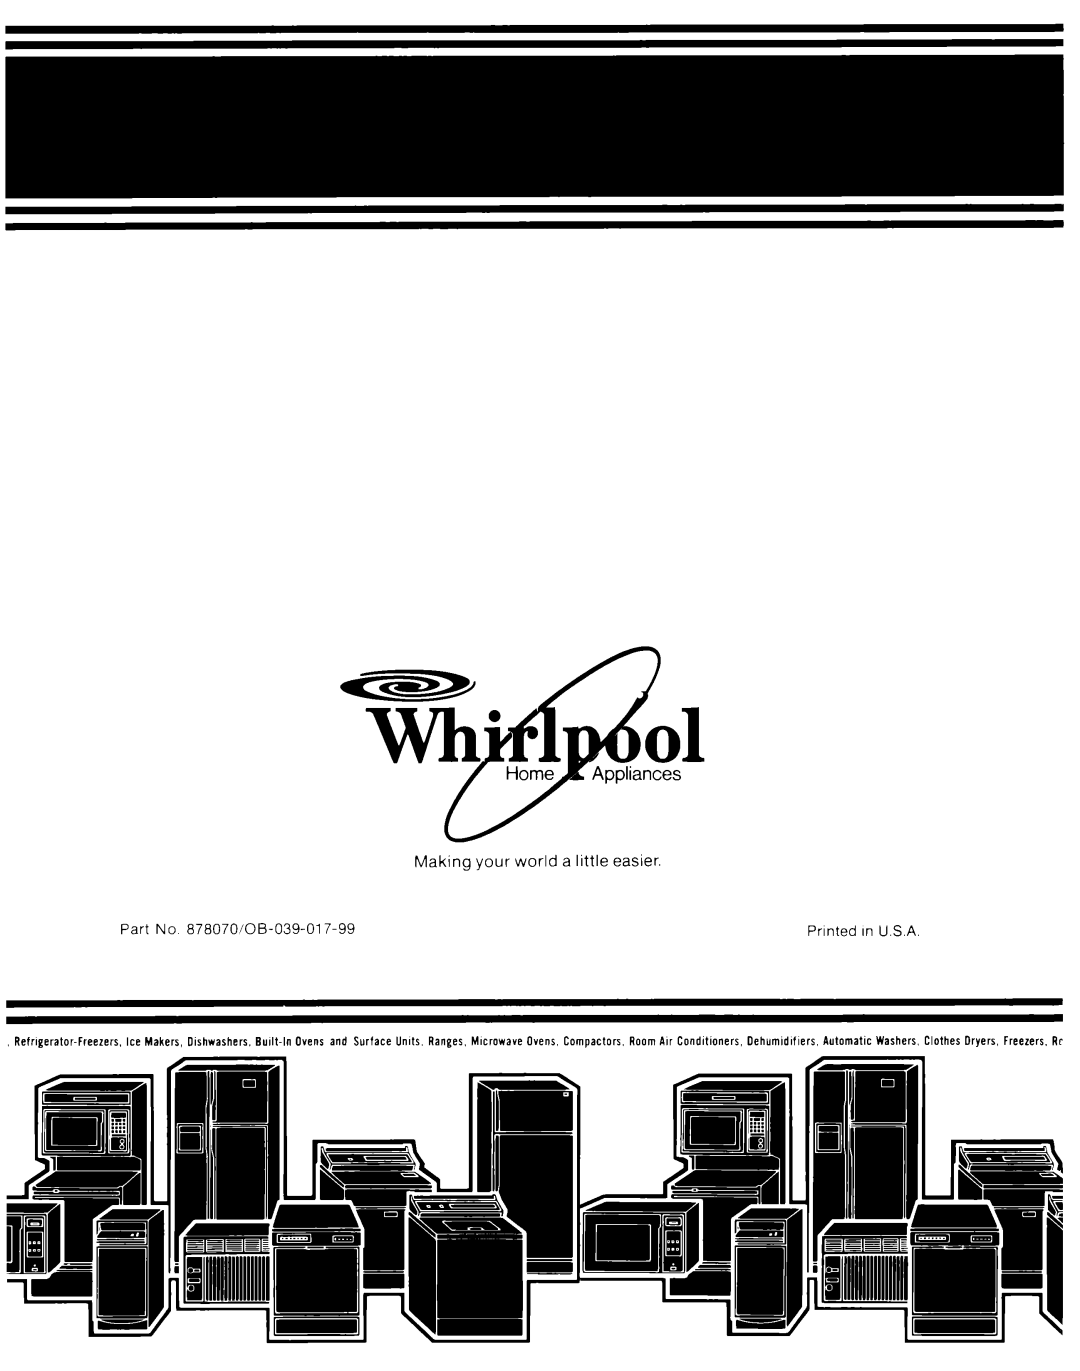 Whirlpool RF0100XKW0 manual Making your world a little easier, Part No 87807OIOB-039-017-99, Prlnted In U.S.A 